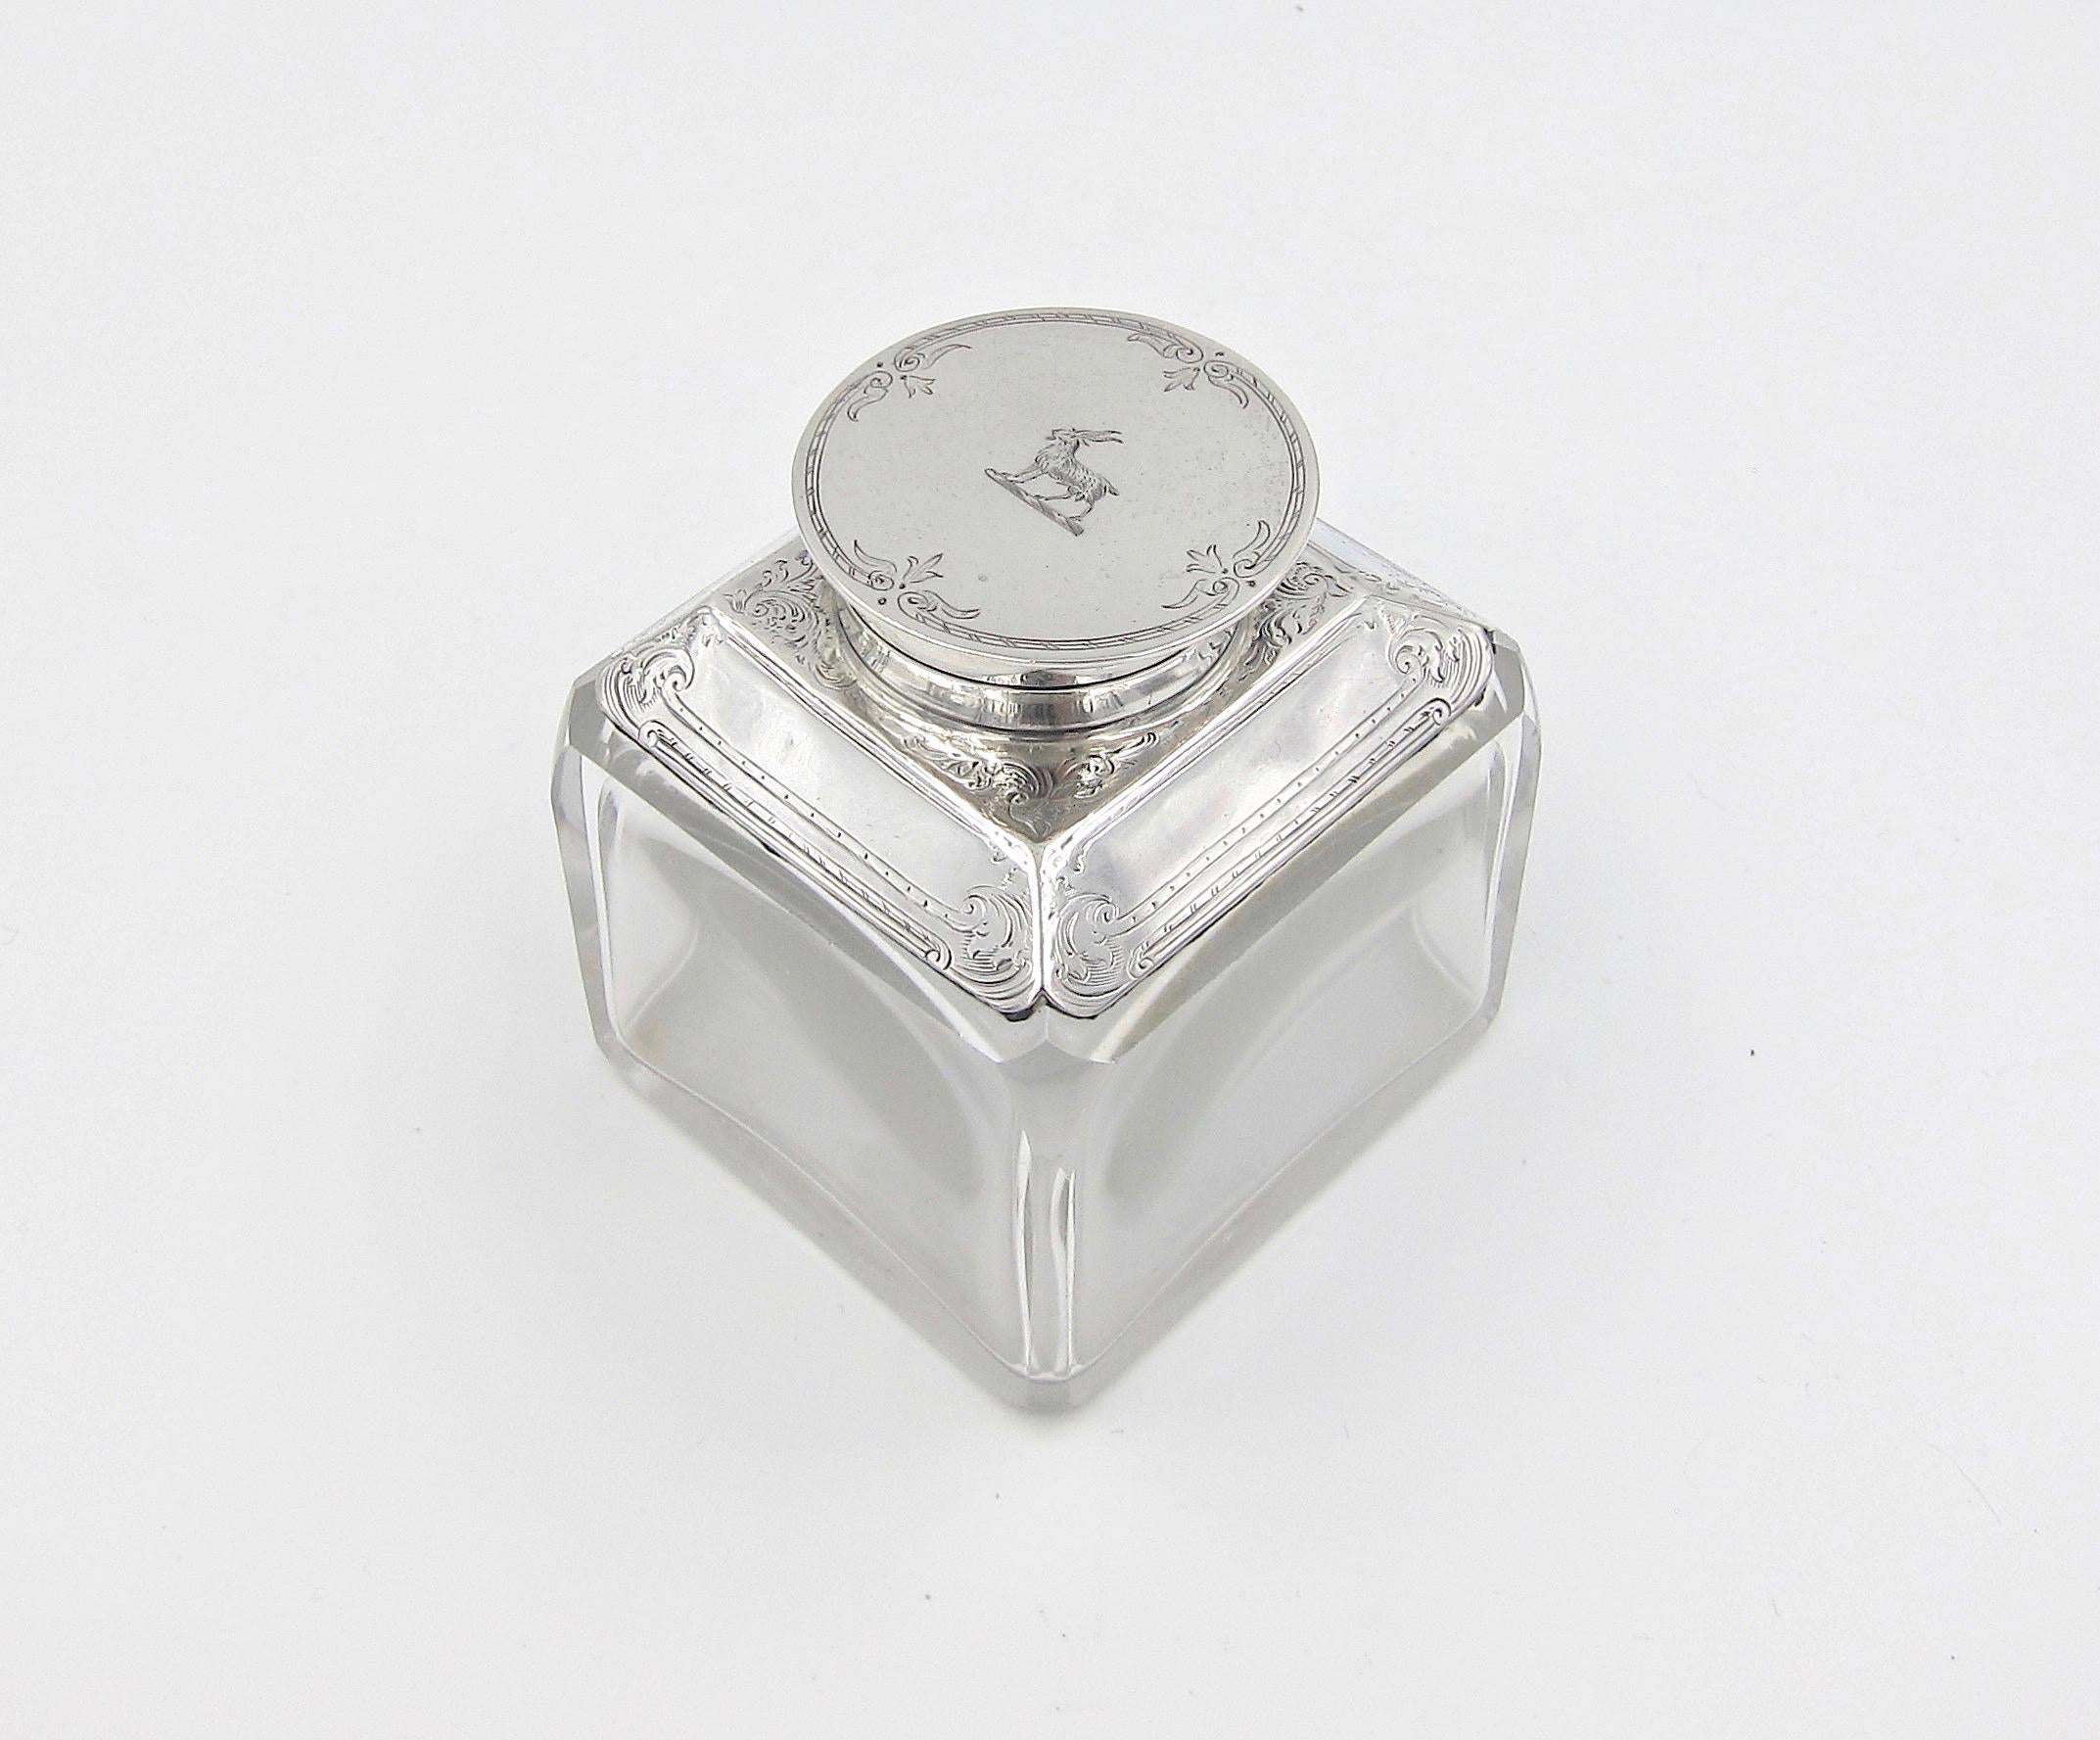 An antique glass inkwell topped with a sterling silver hinged lid and collar, made in England in 1894. This Victorian desk accessory was crafted from heavy glass with canted corners. The hinged lid and silver mounts were hand-engraved with delicate